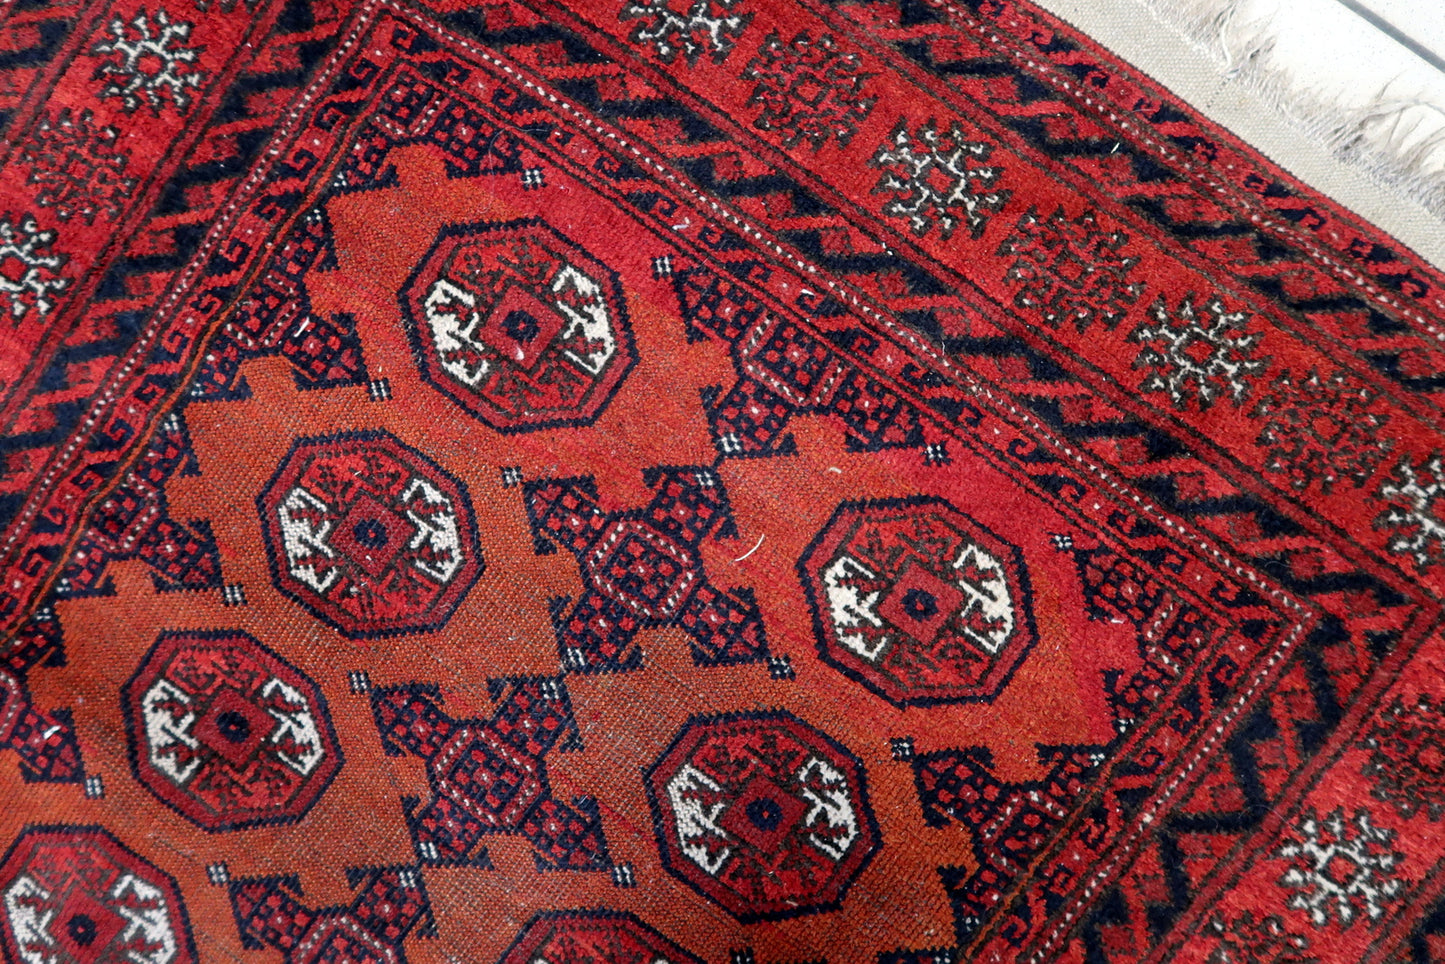 Close-up of red hues on Handmade Antique Afghan Baluch Rug - Detailed view highlighting the vibrant red color dominating the rug.